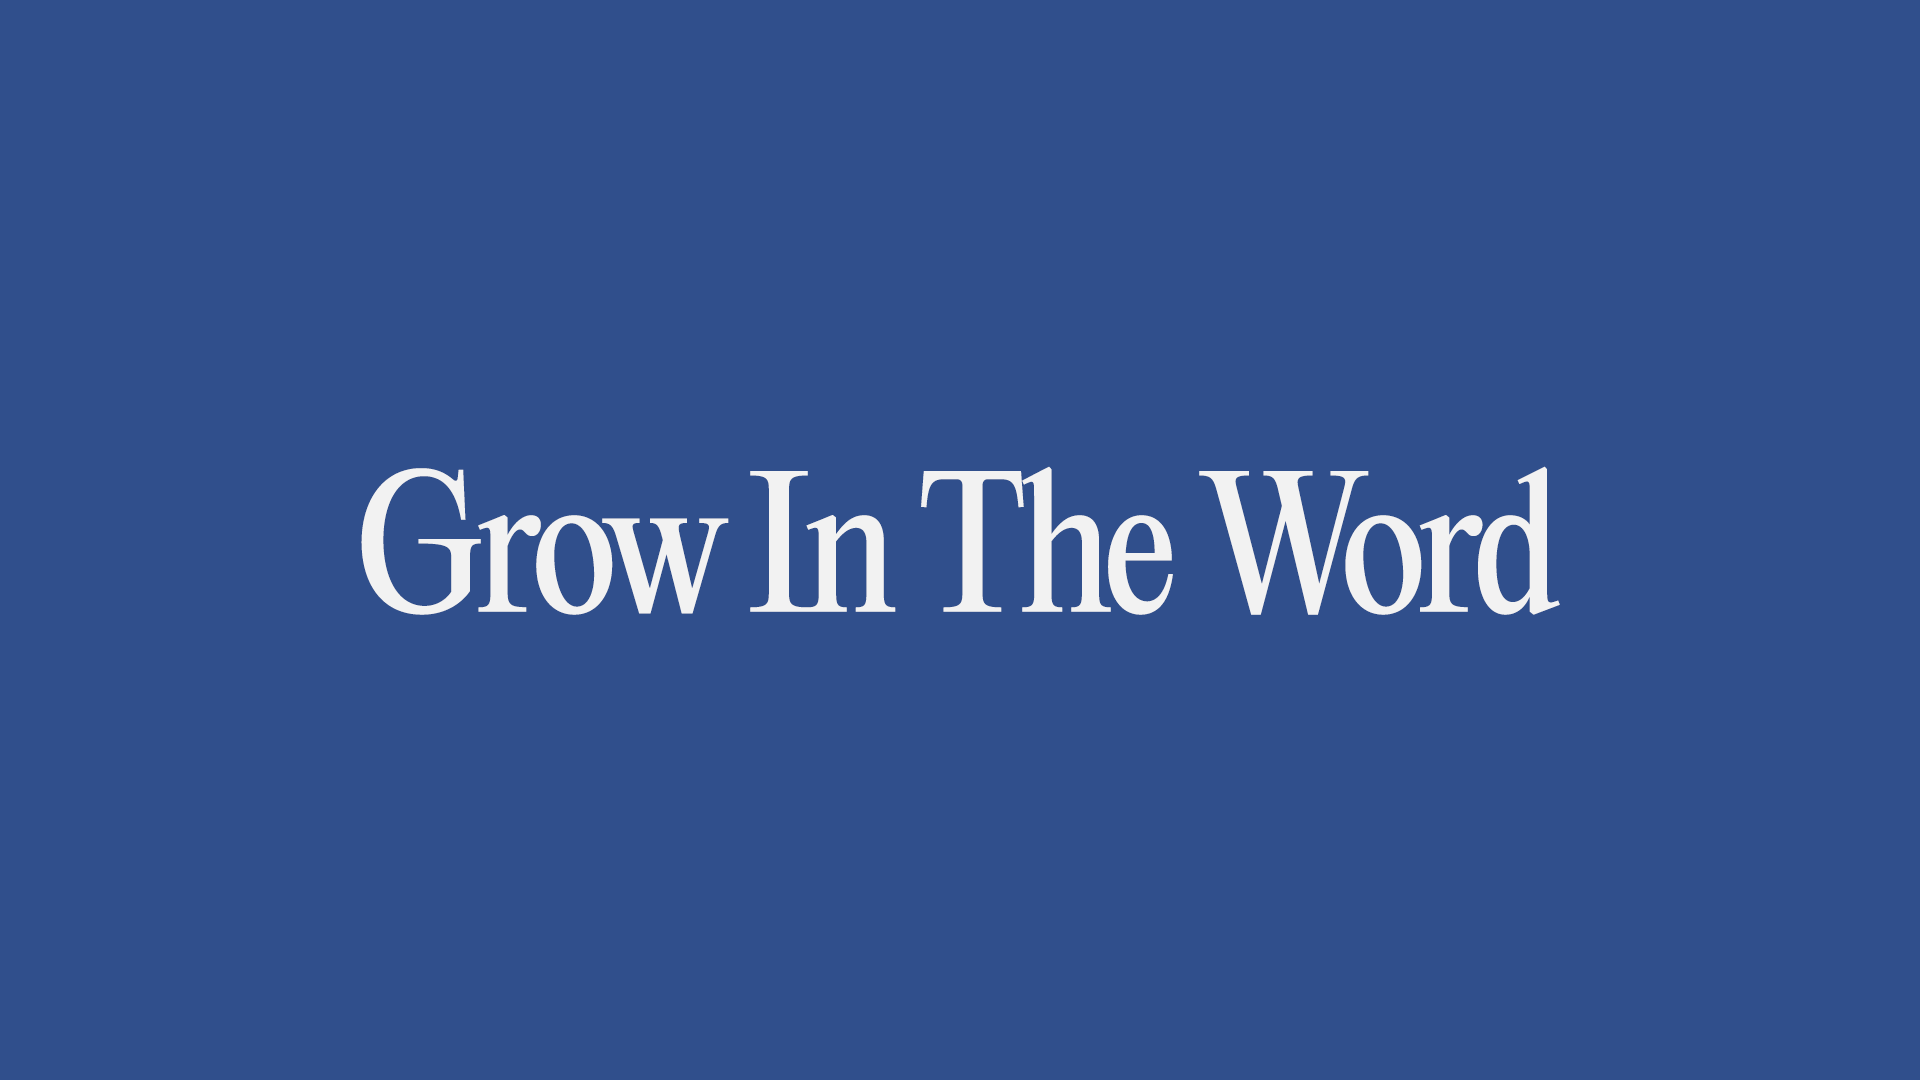 Grow in the Word Image